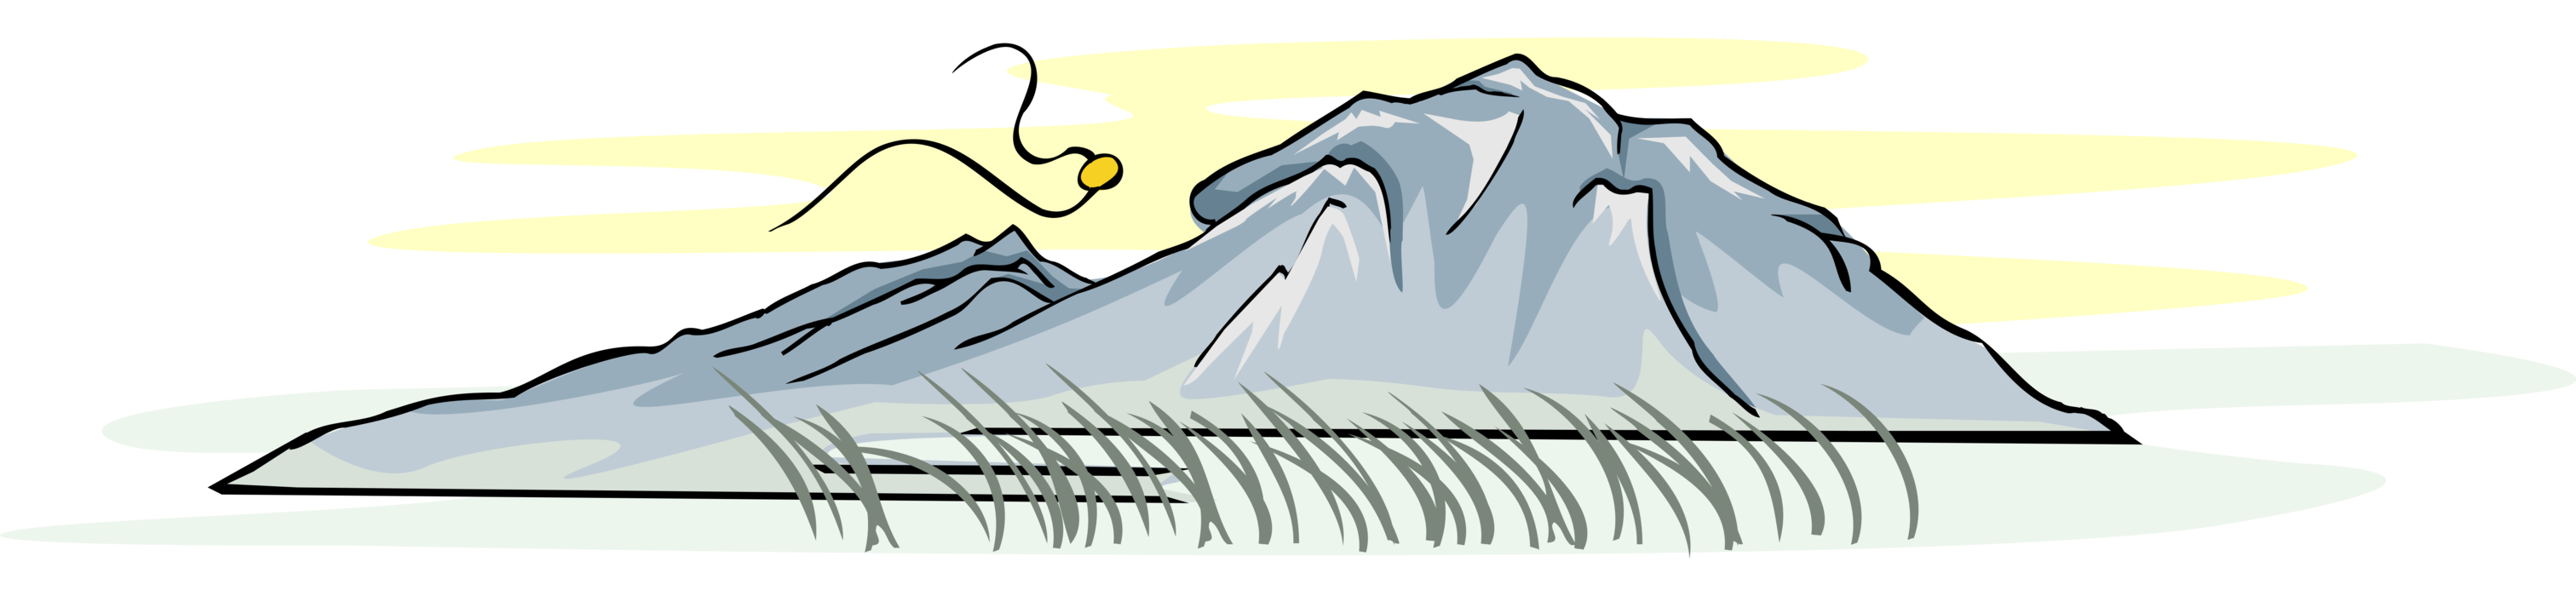 Vector Illustration of Mountain with Marshland Grasses and Kite Flying